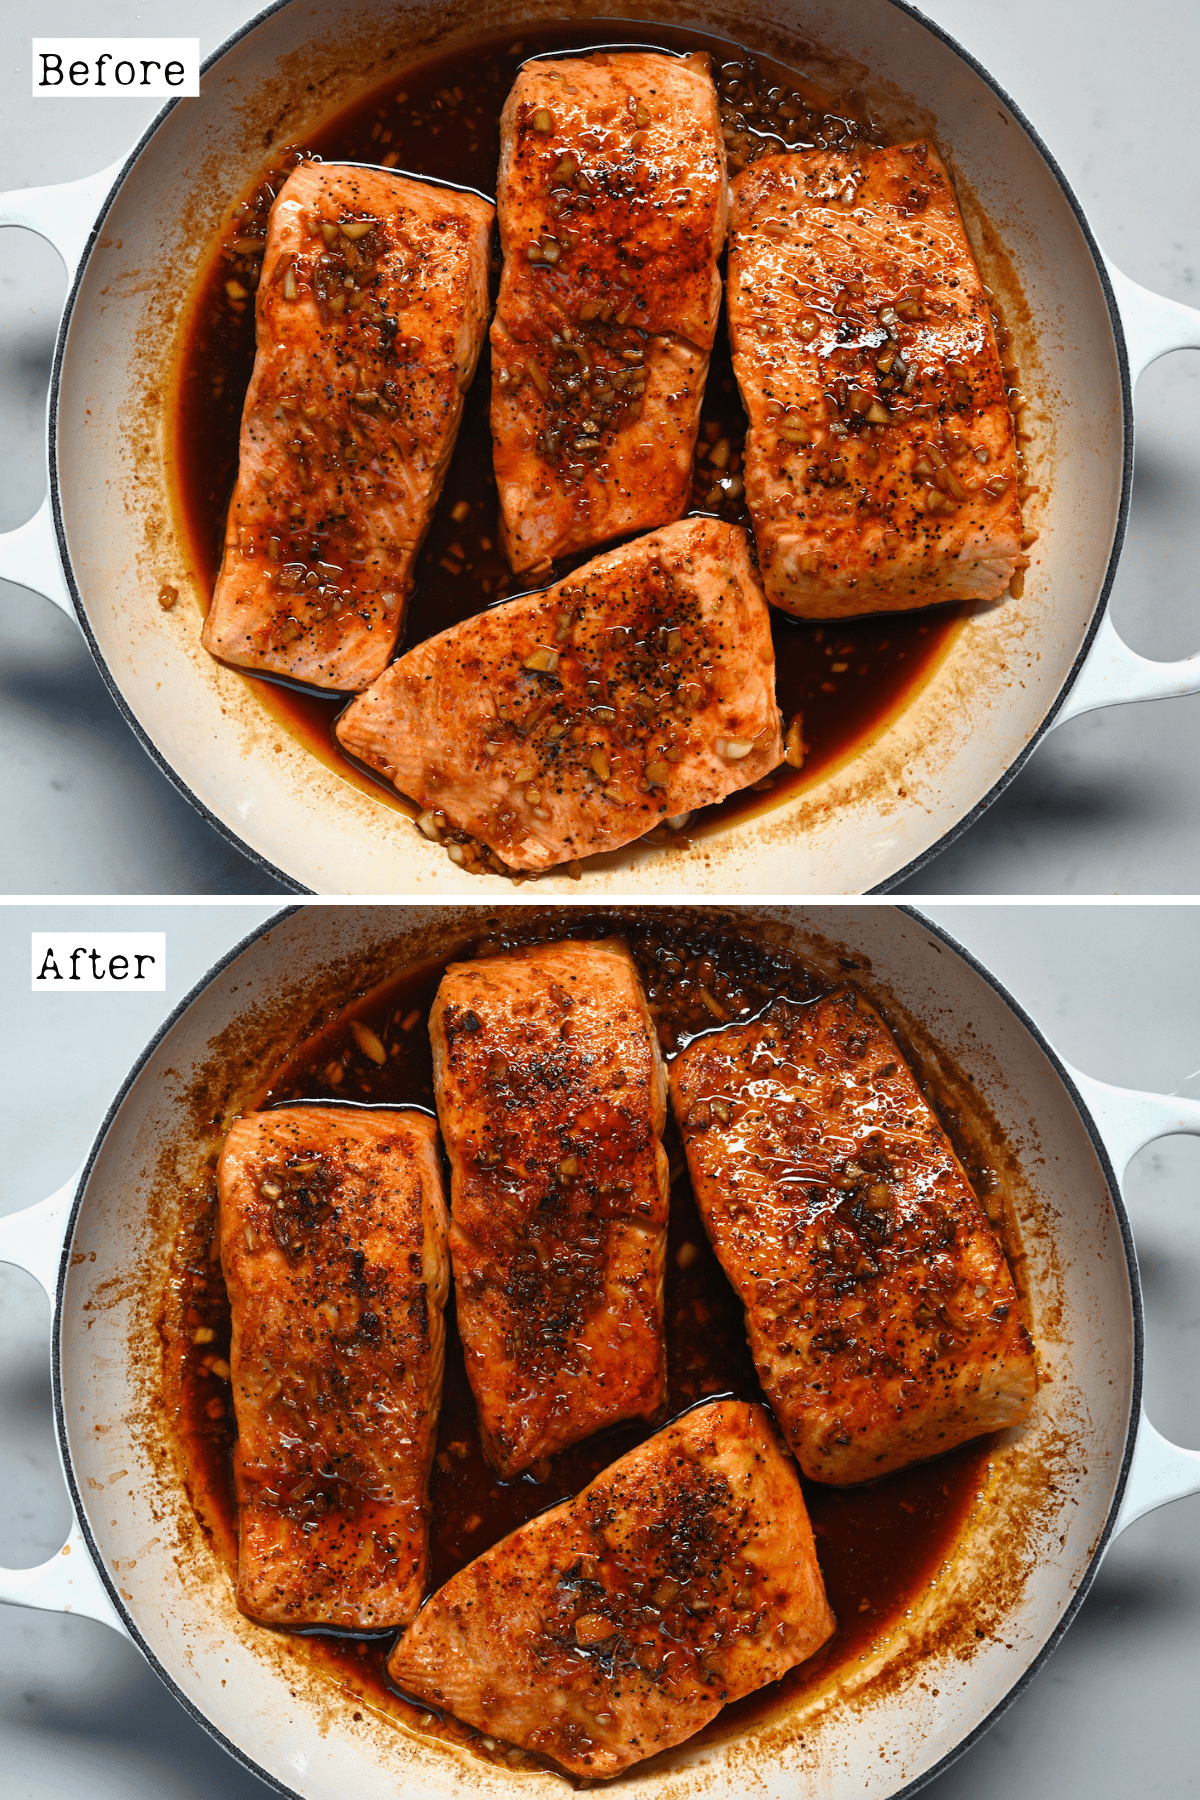 Before and after broiling salmon